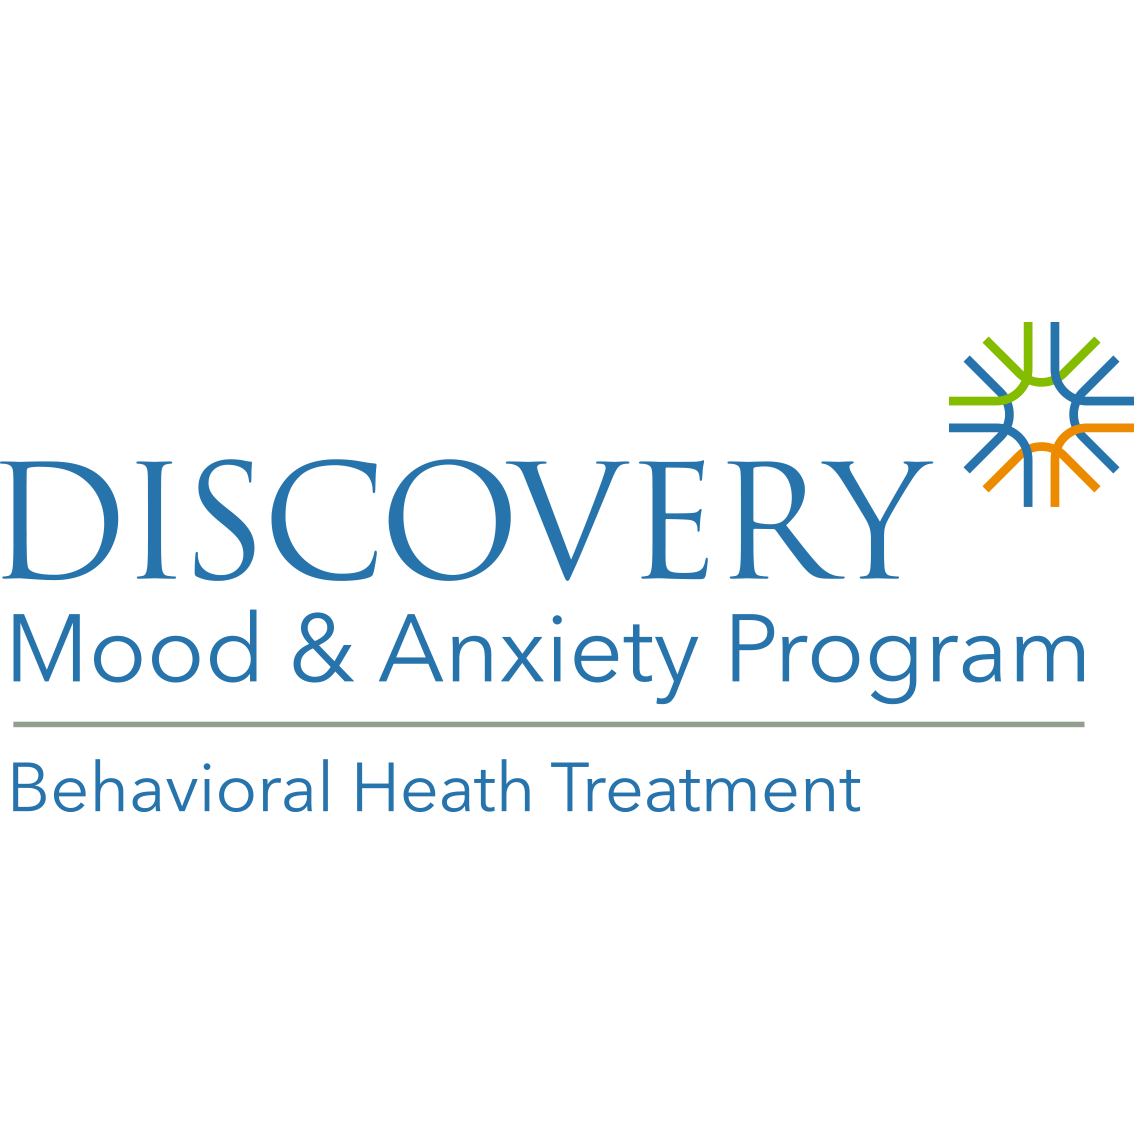 Discovery Mood & Anxiety Program - Whittier